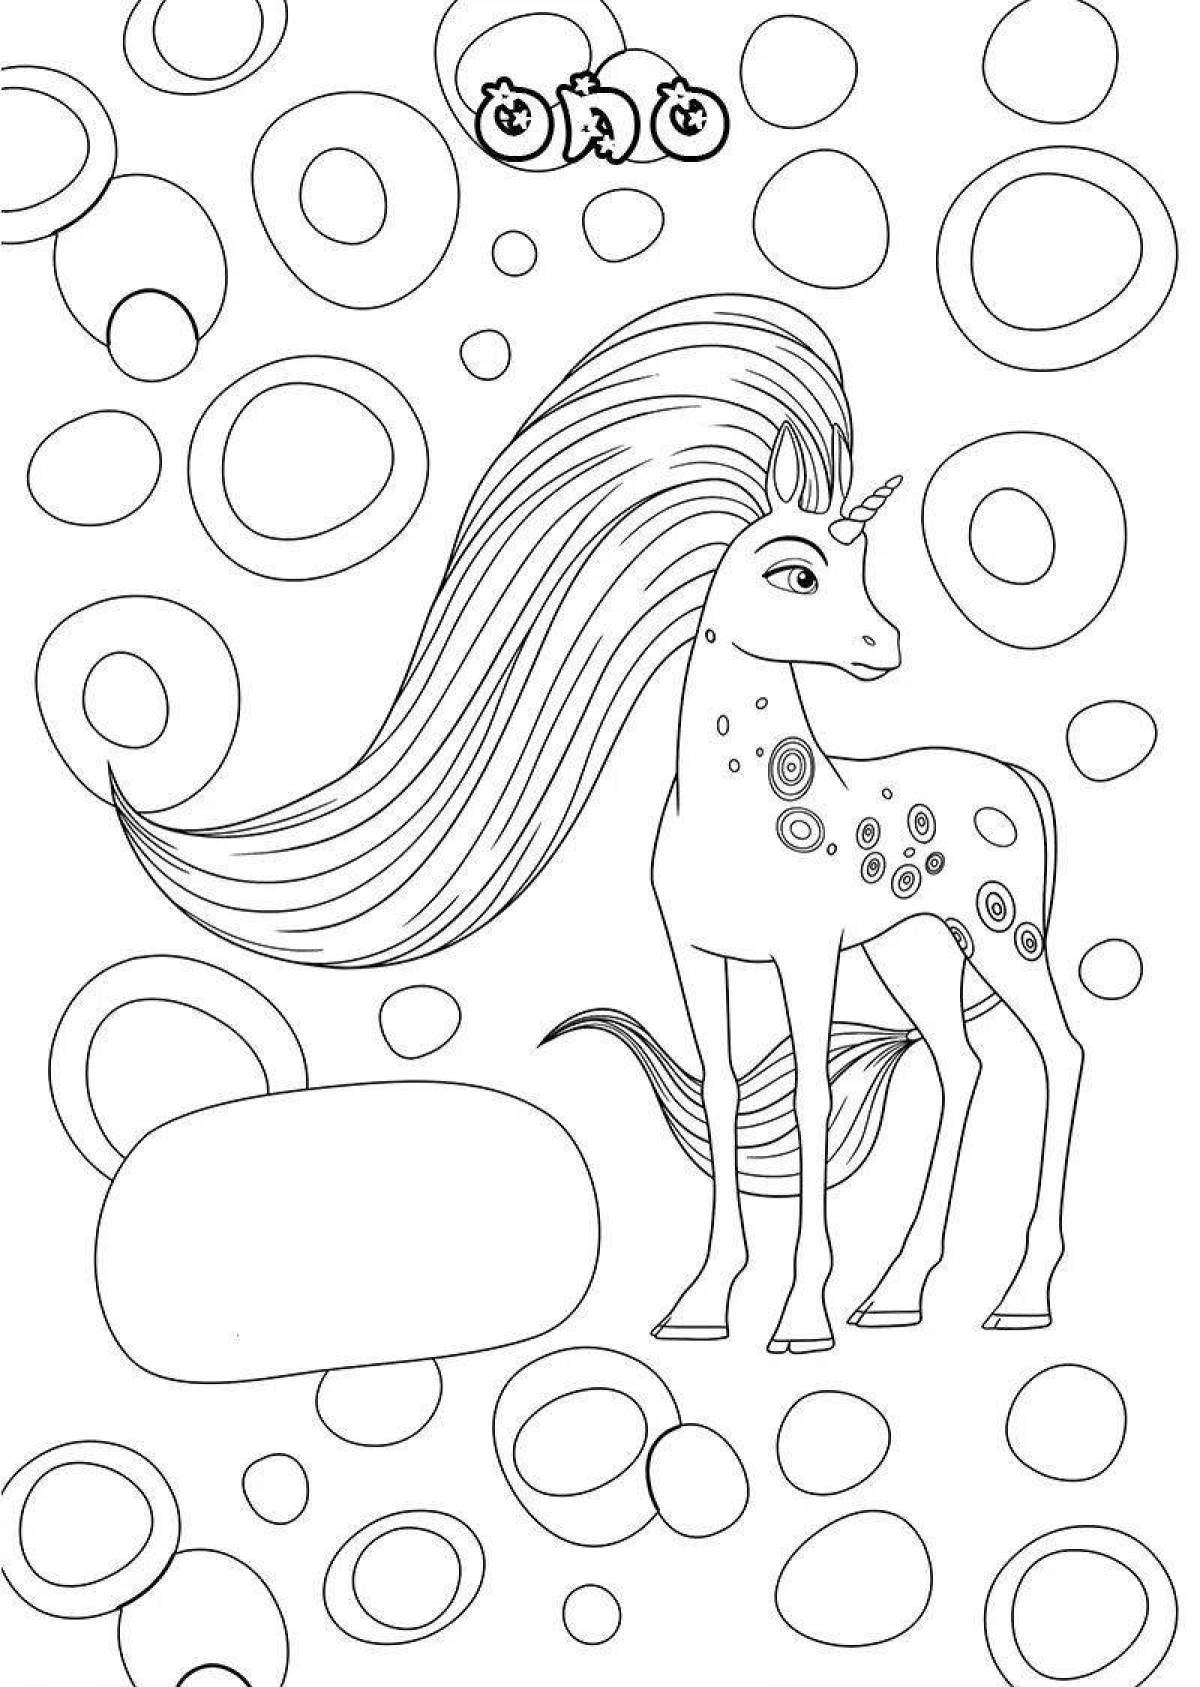 Lovely coloring mia and me unicorns